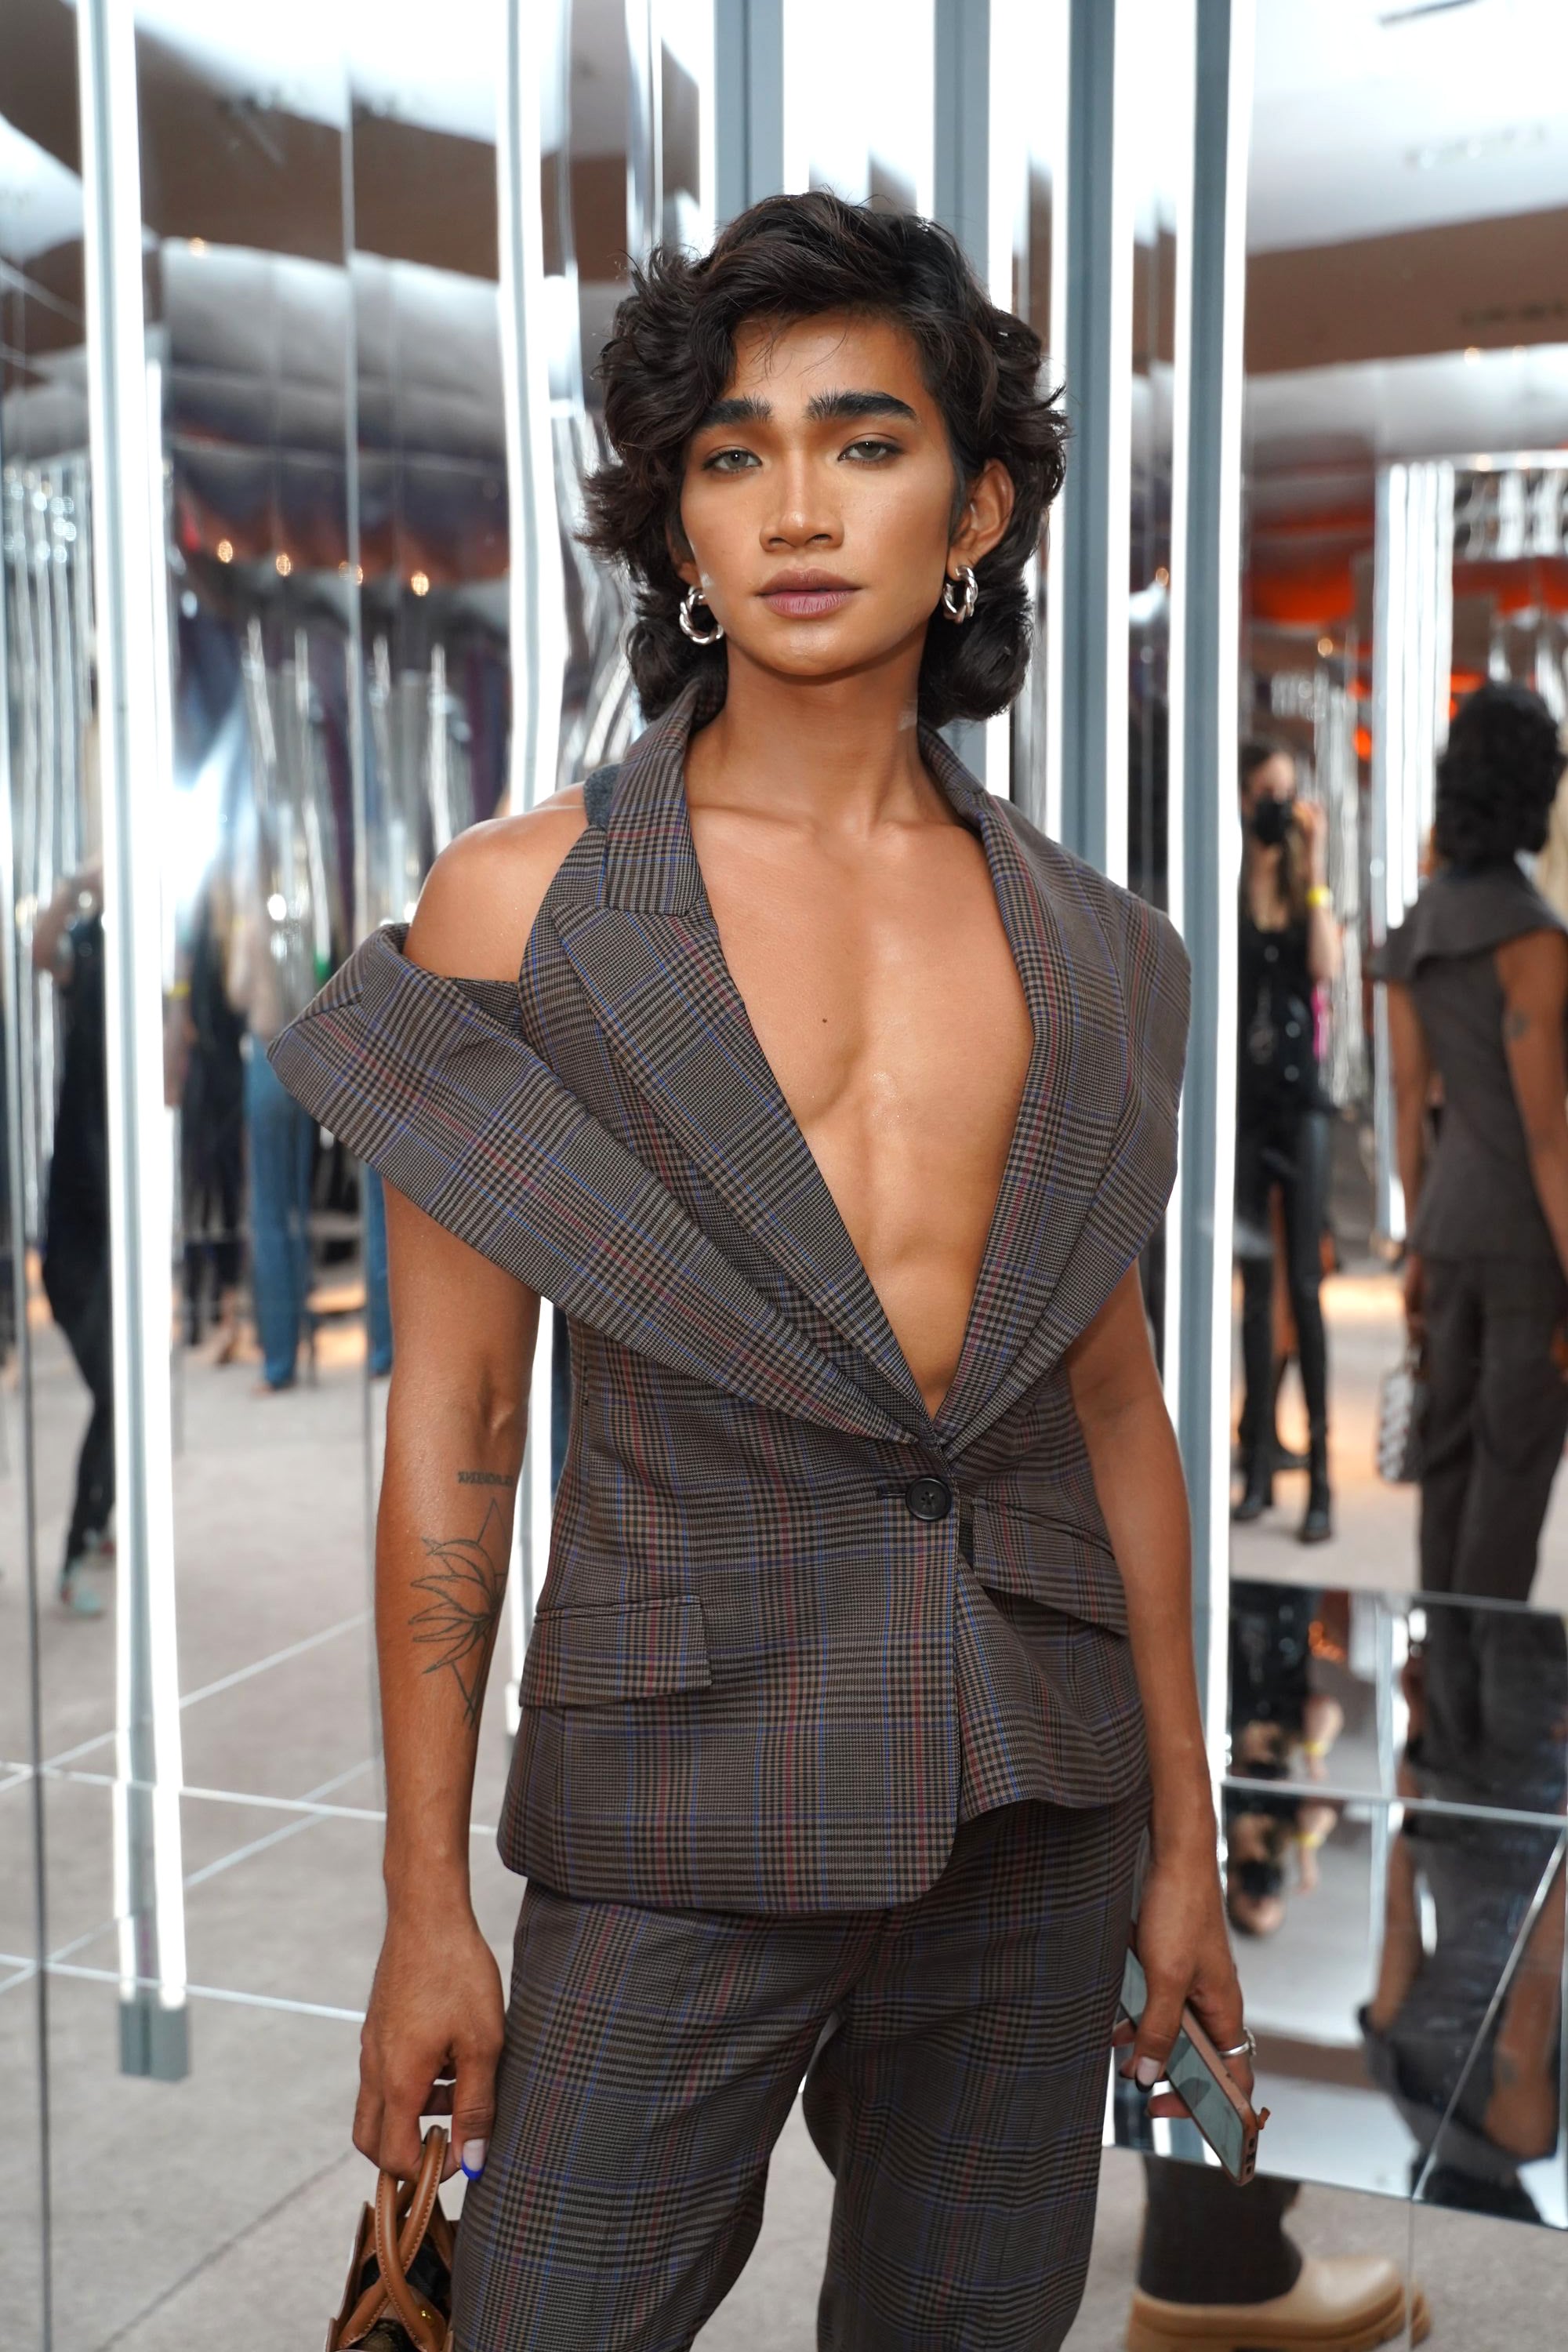 NEW YORK, NEW YORK - SEPTEMBER 09: Bretman Rock attends the REVOLVE Gallery NYFW Presentation And Pop-up at Hudson Yards on September 09, 2021 in New York City. (Photo by Sean Zanni/Getty Images for REVOLVE)